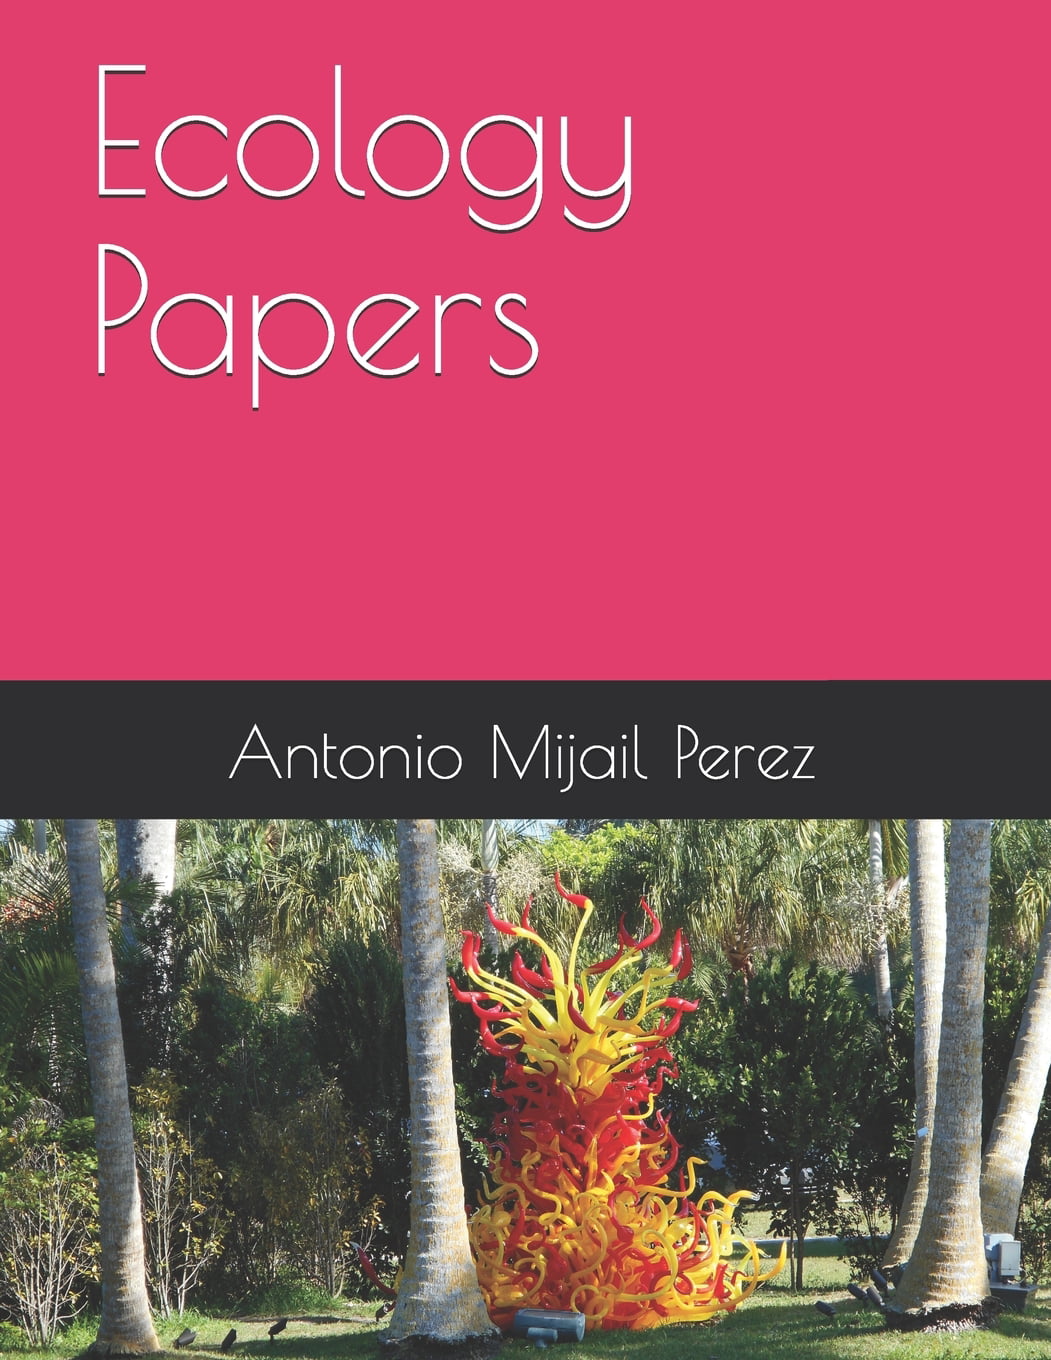 plant ecology research papers